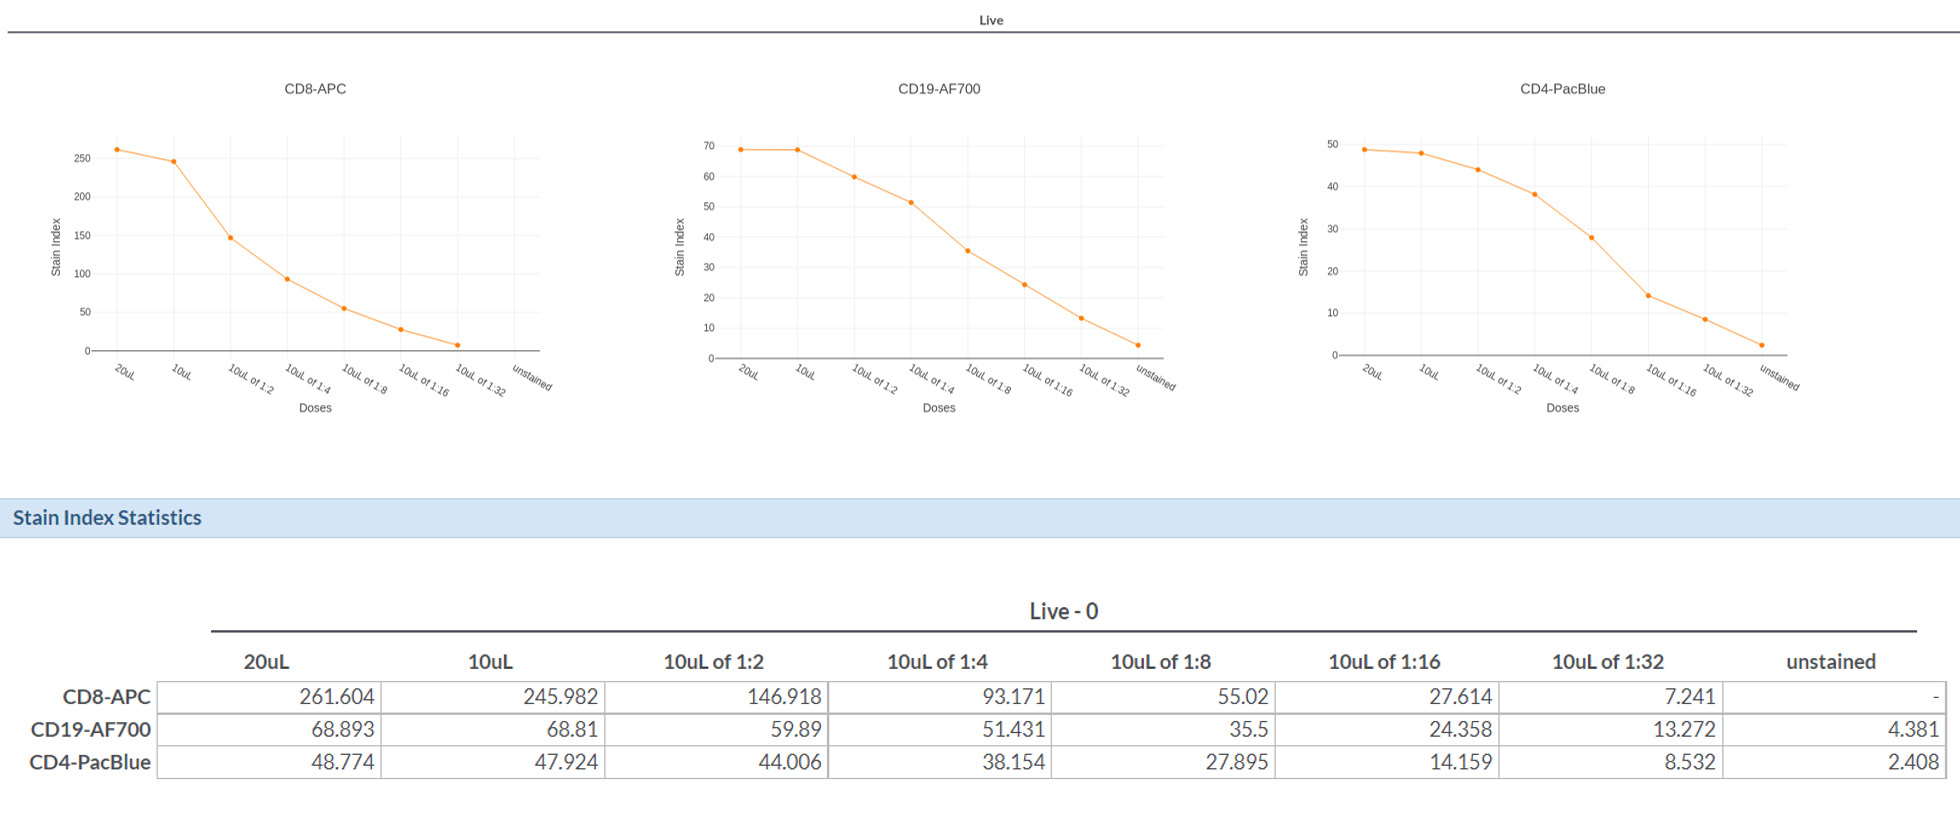 Figure 6. Antibody Titration Curves and Summary Data Tables for CD8-APC, CD19-AF700 and CD4-Pacific Blue Antibodies